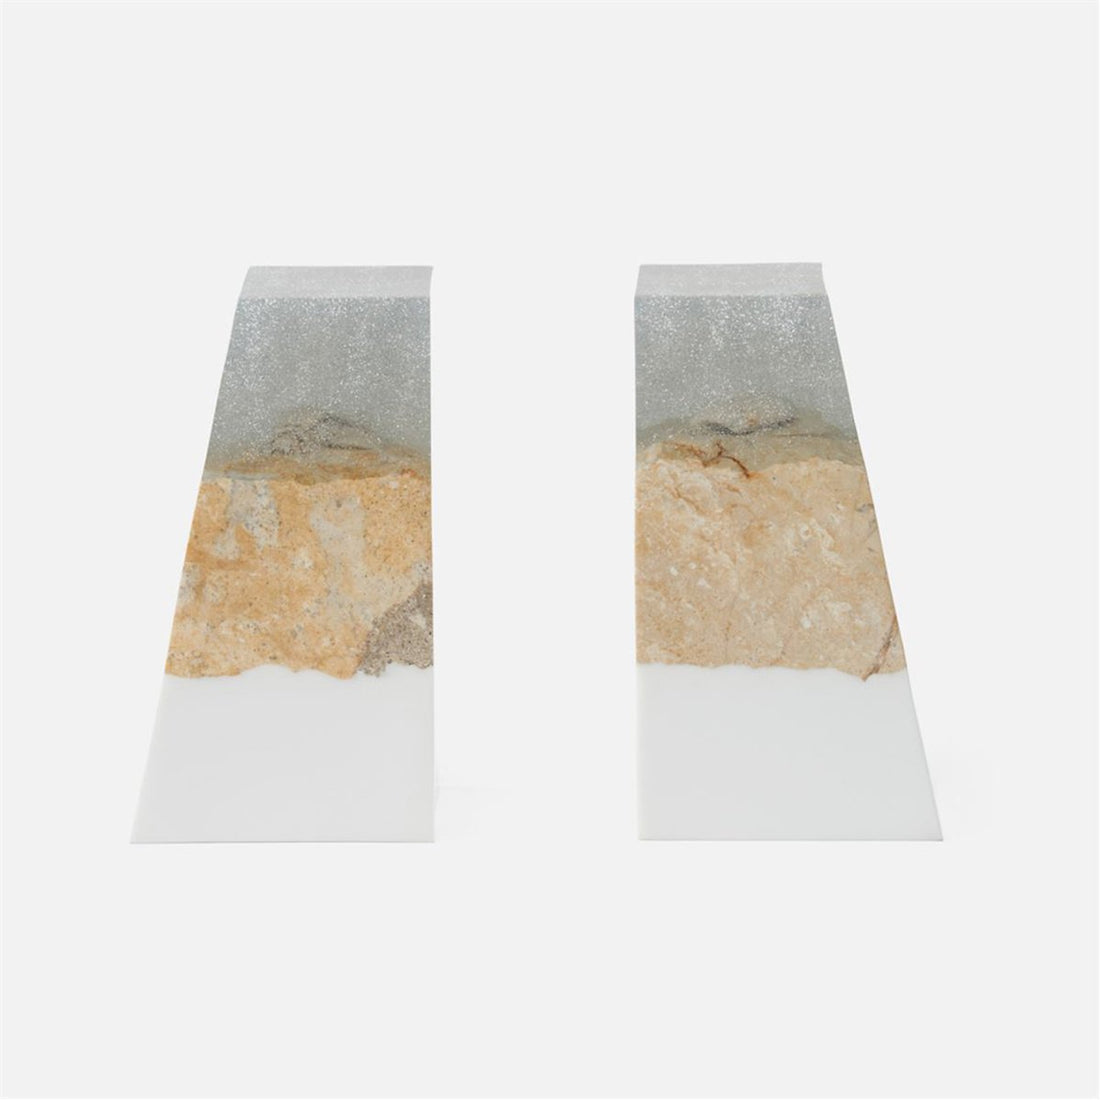 Made Goods Otis Resin with Stone Bookends, 2-Piece Set